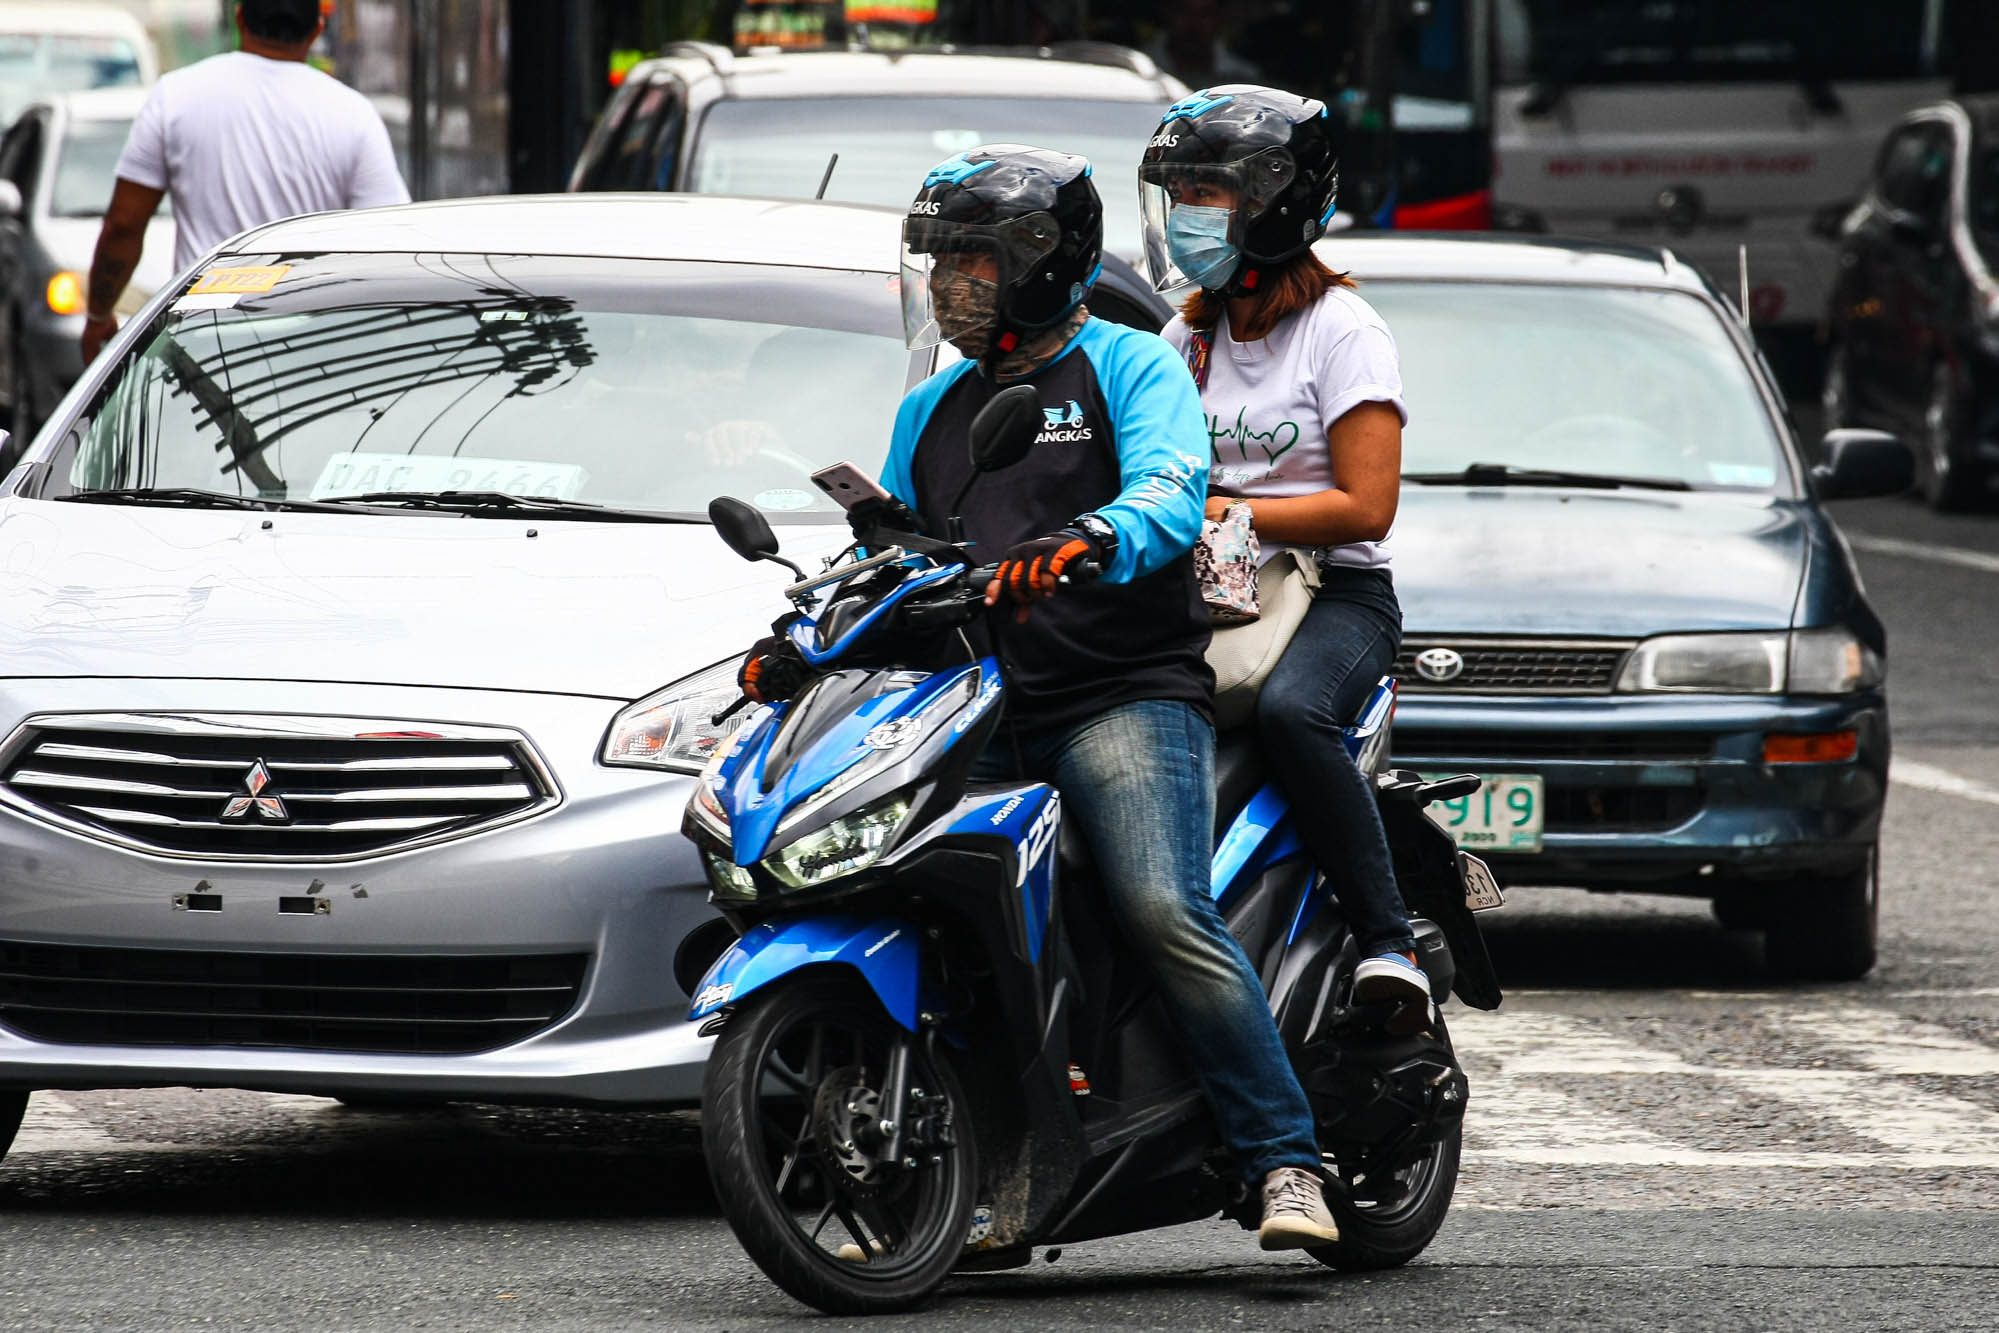 Motorcycle taxi pilot run will continue – TWG head